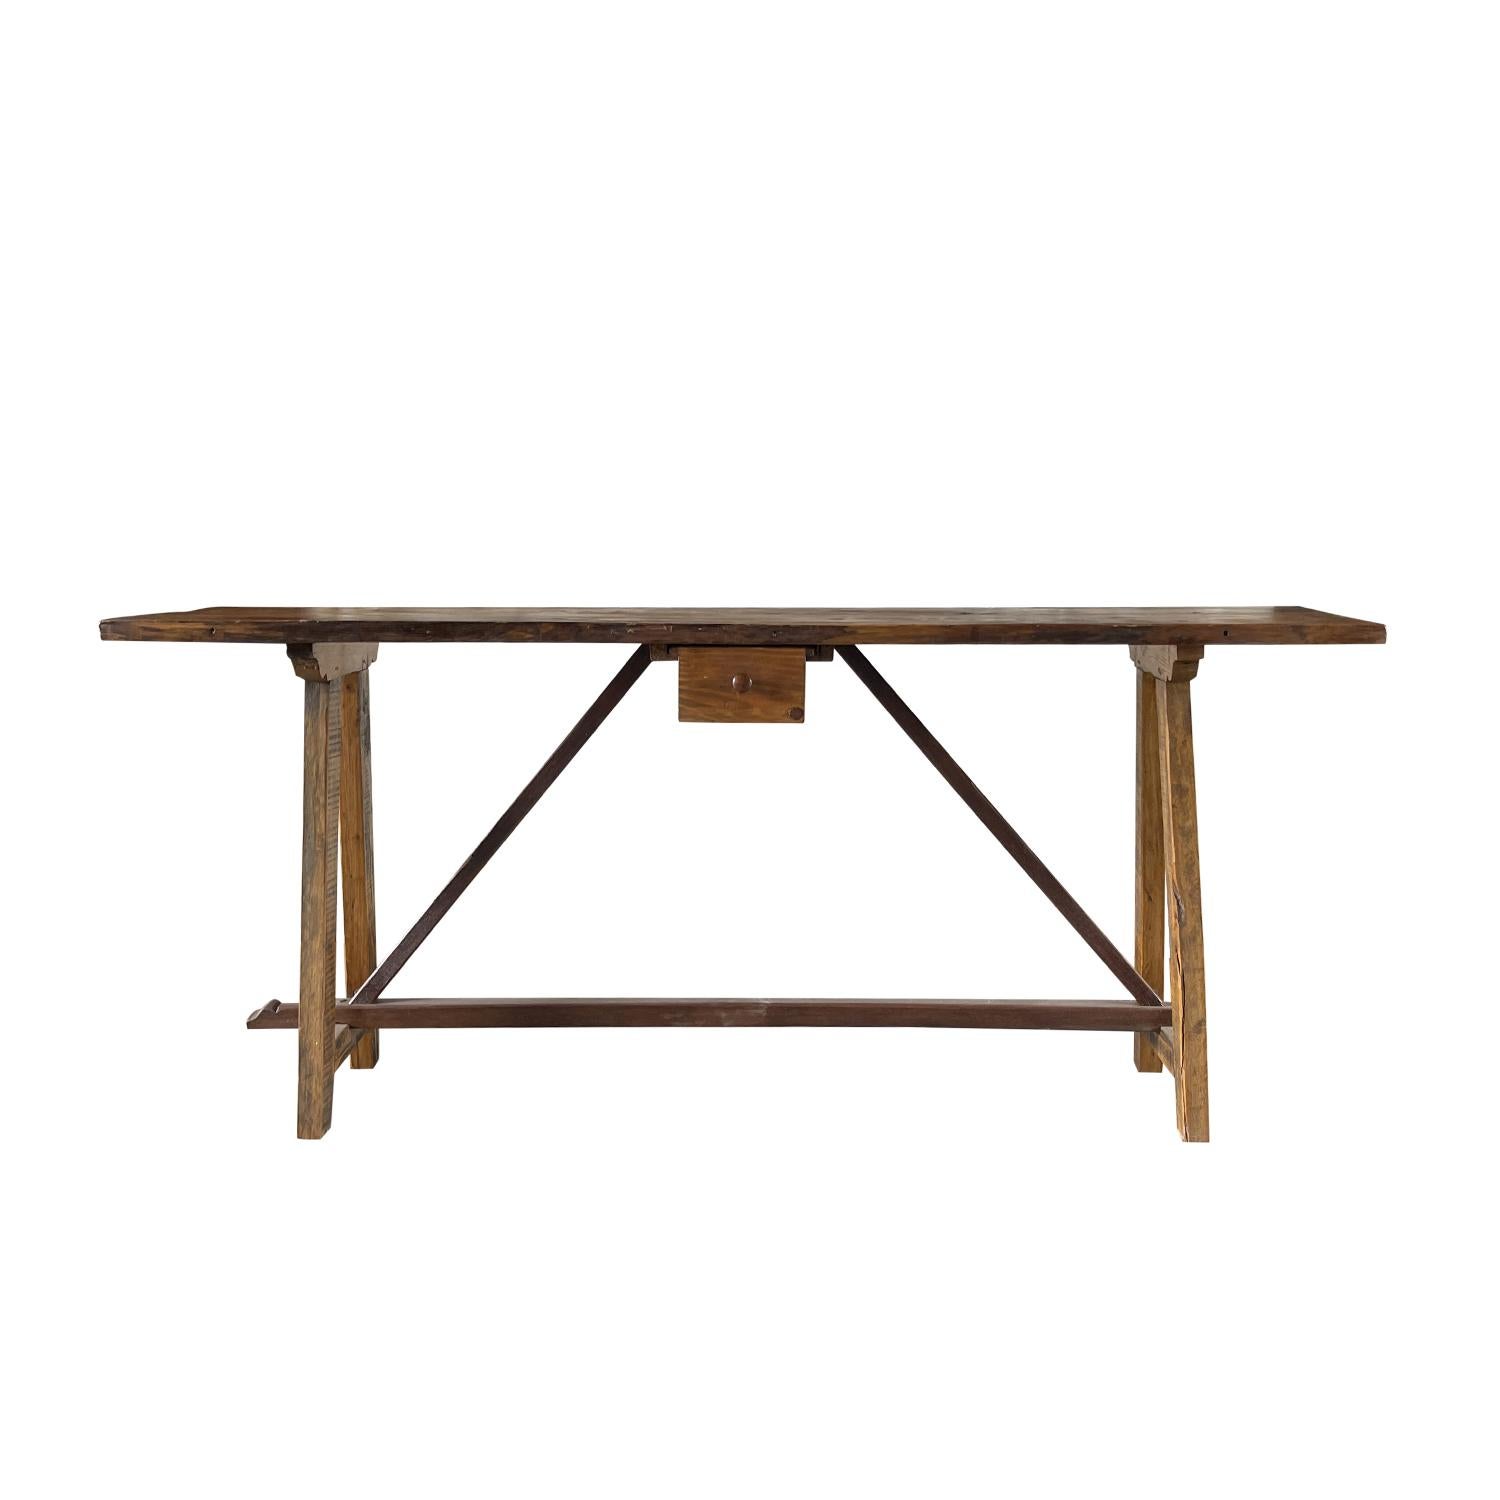 A late 18th Century Italian rustic primitive console table with cross-stretchers and a single drawer, in good condition. This nicely constructed freestanding side, end table is hand made in warm and luminous Walnut wood with original patina. Wear